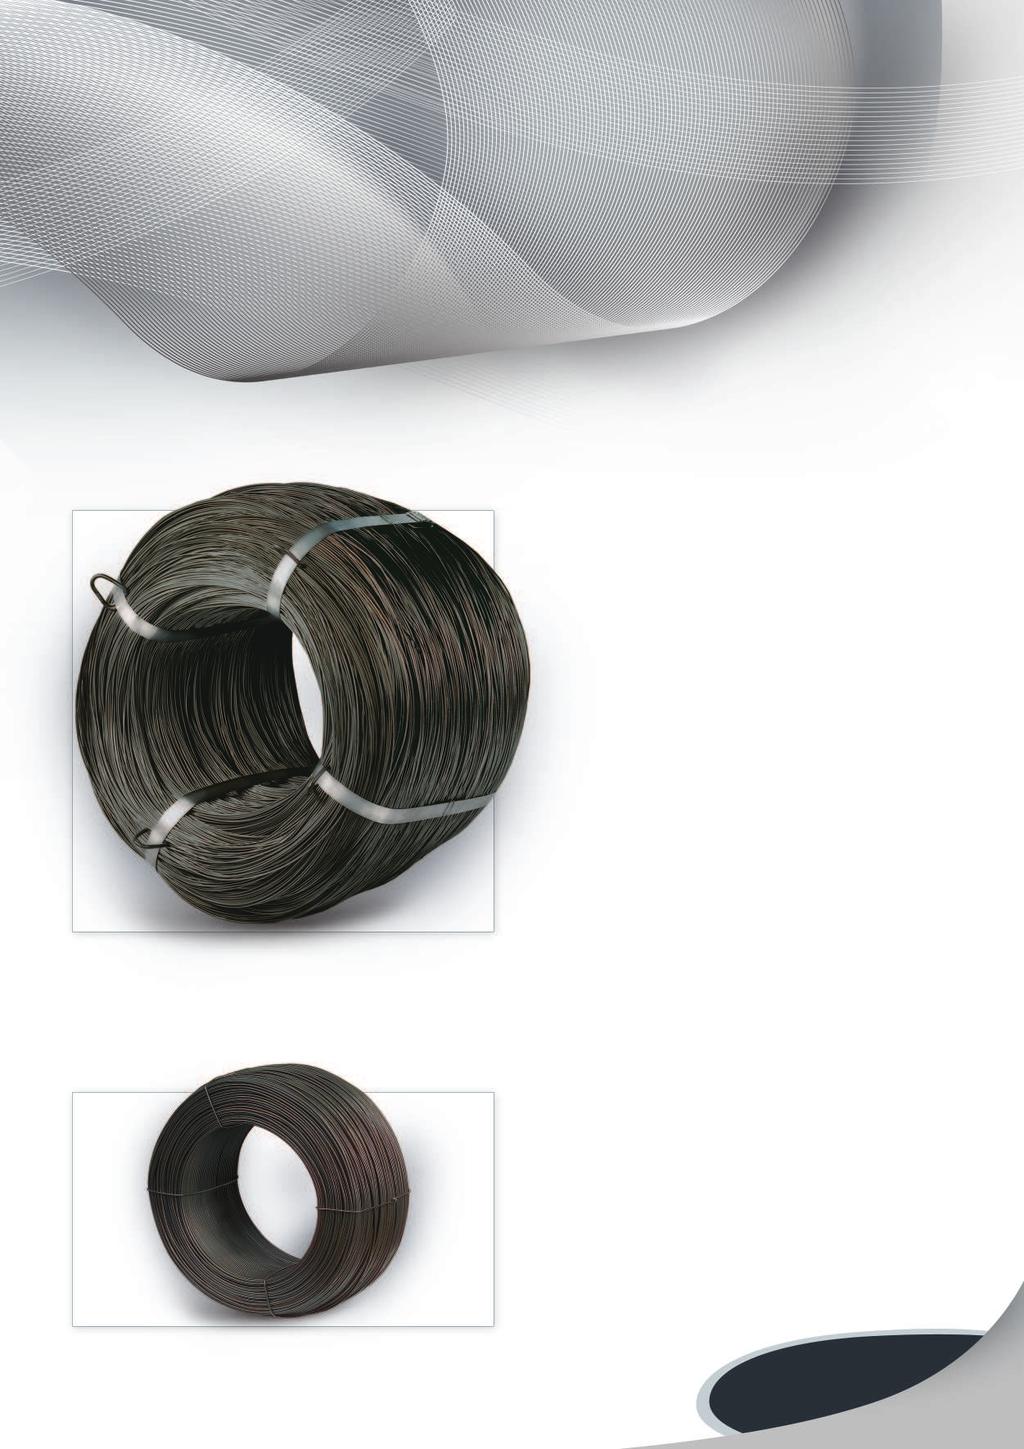 Semi hard wires WIRE DIAMETER: TENSILE STRENGTH: RANGE OF WEIGHT: TYPE OF PACKAGING: SURFACE OF WIRE: 1,20 14,00 mm 420 600 MPa 30 600 kg coils standard or cleaned - production of fencing panels -